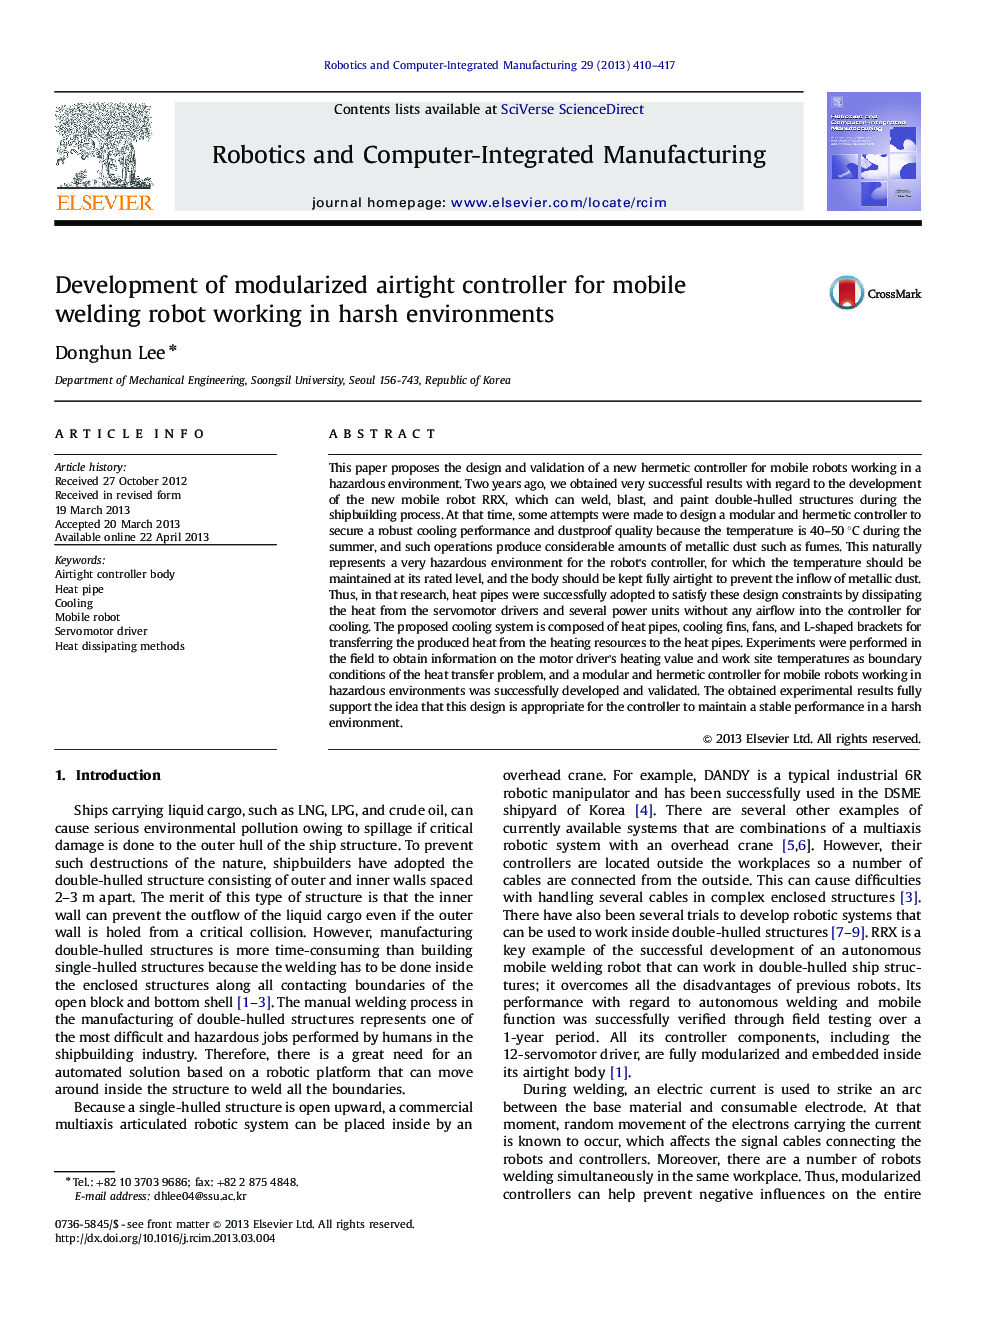 Development of modularized airtight controller for mobile welding robot working in harsh environments